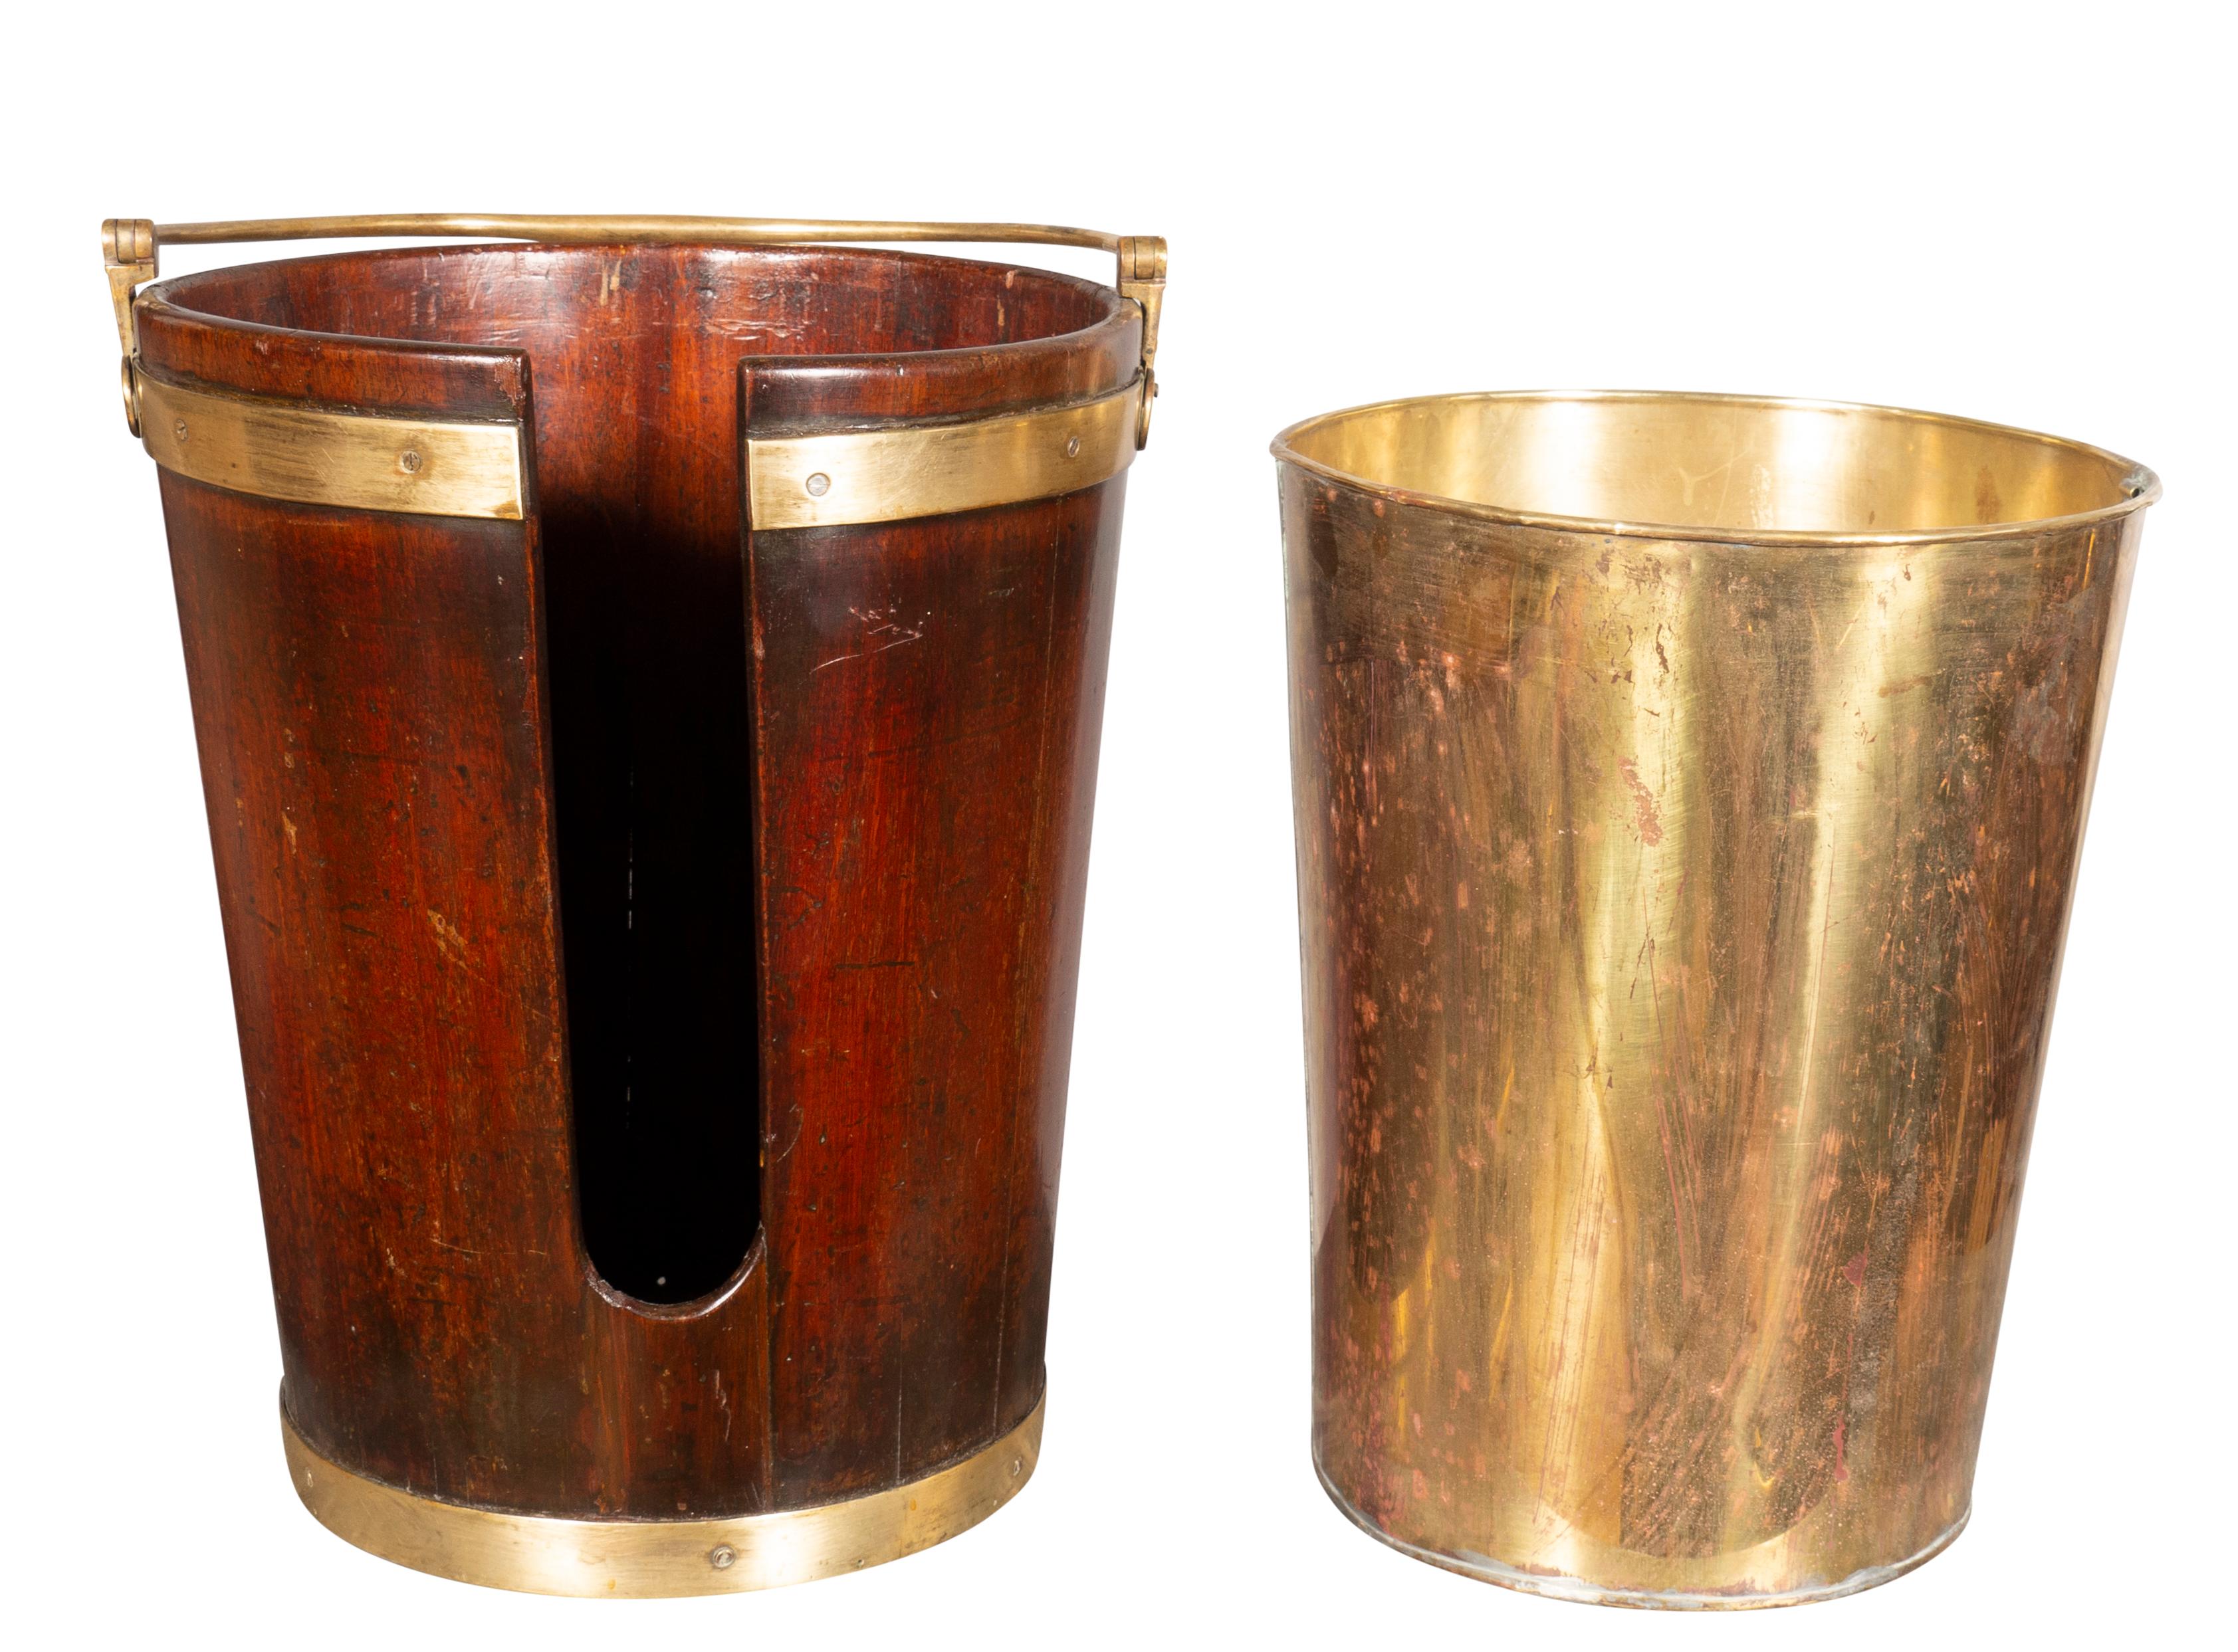 Pair of Regency Mahogany and Brass Banded Plate Buckets For Sale 7